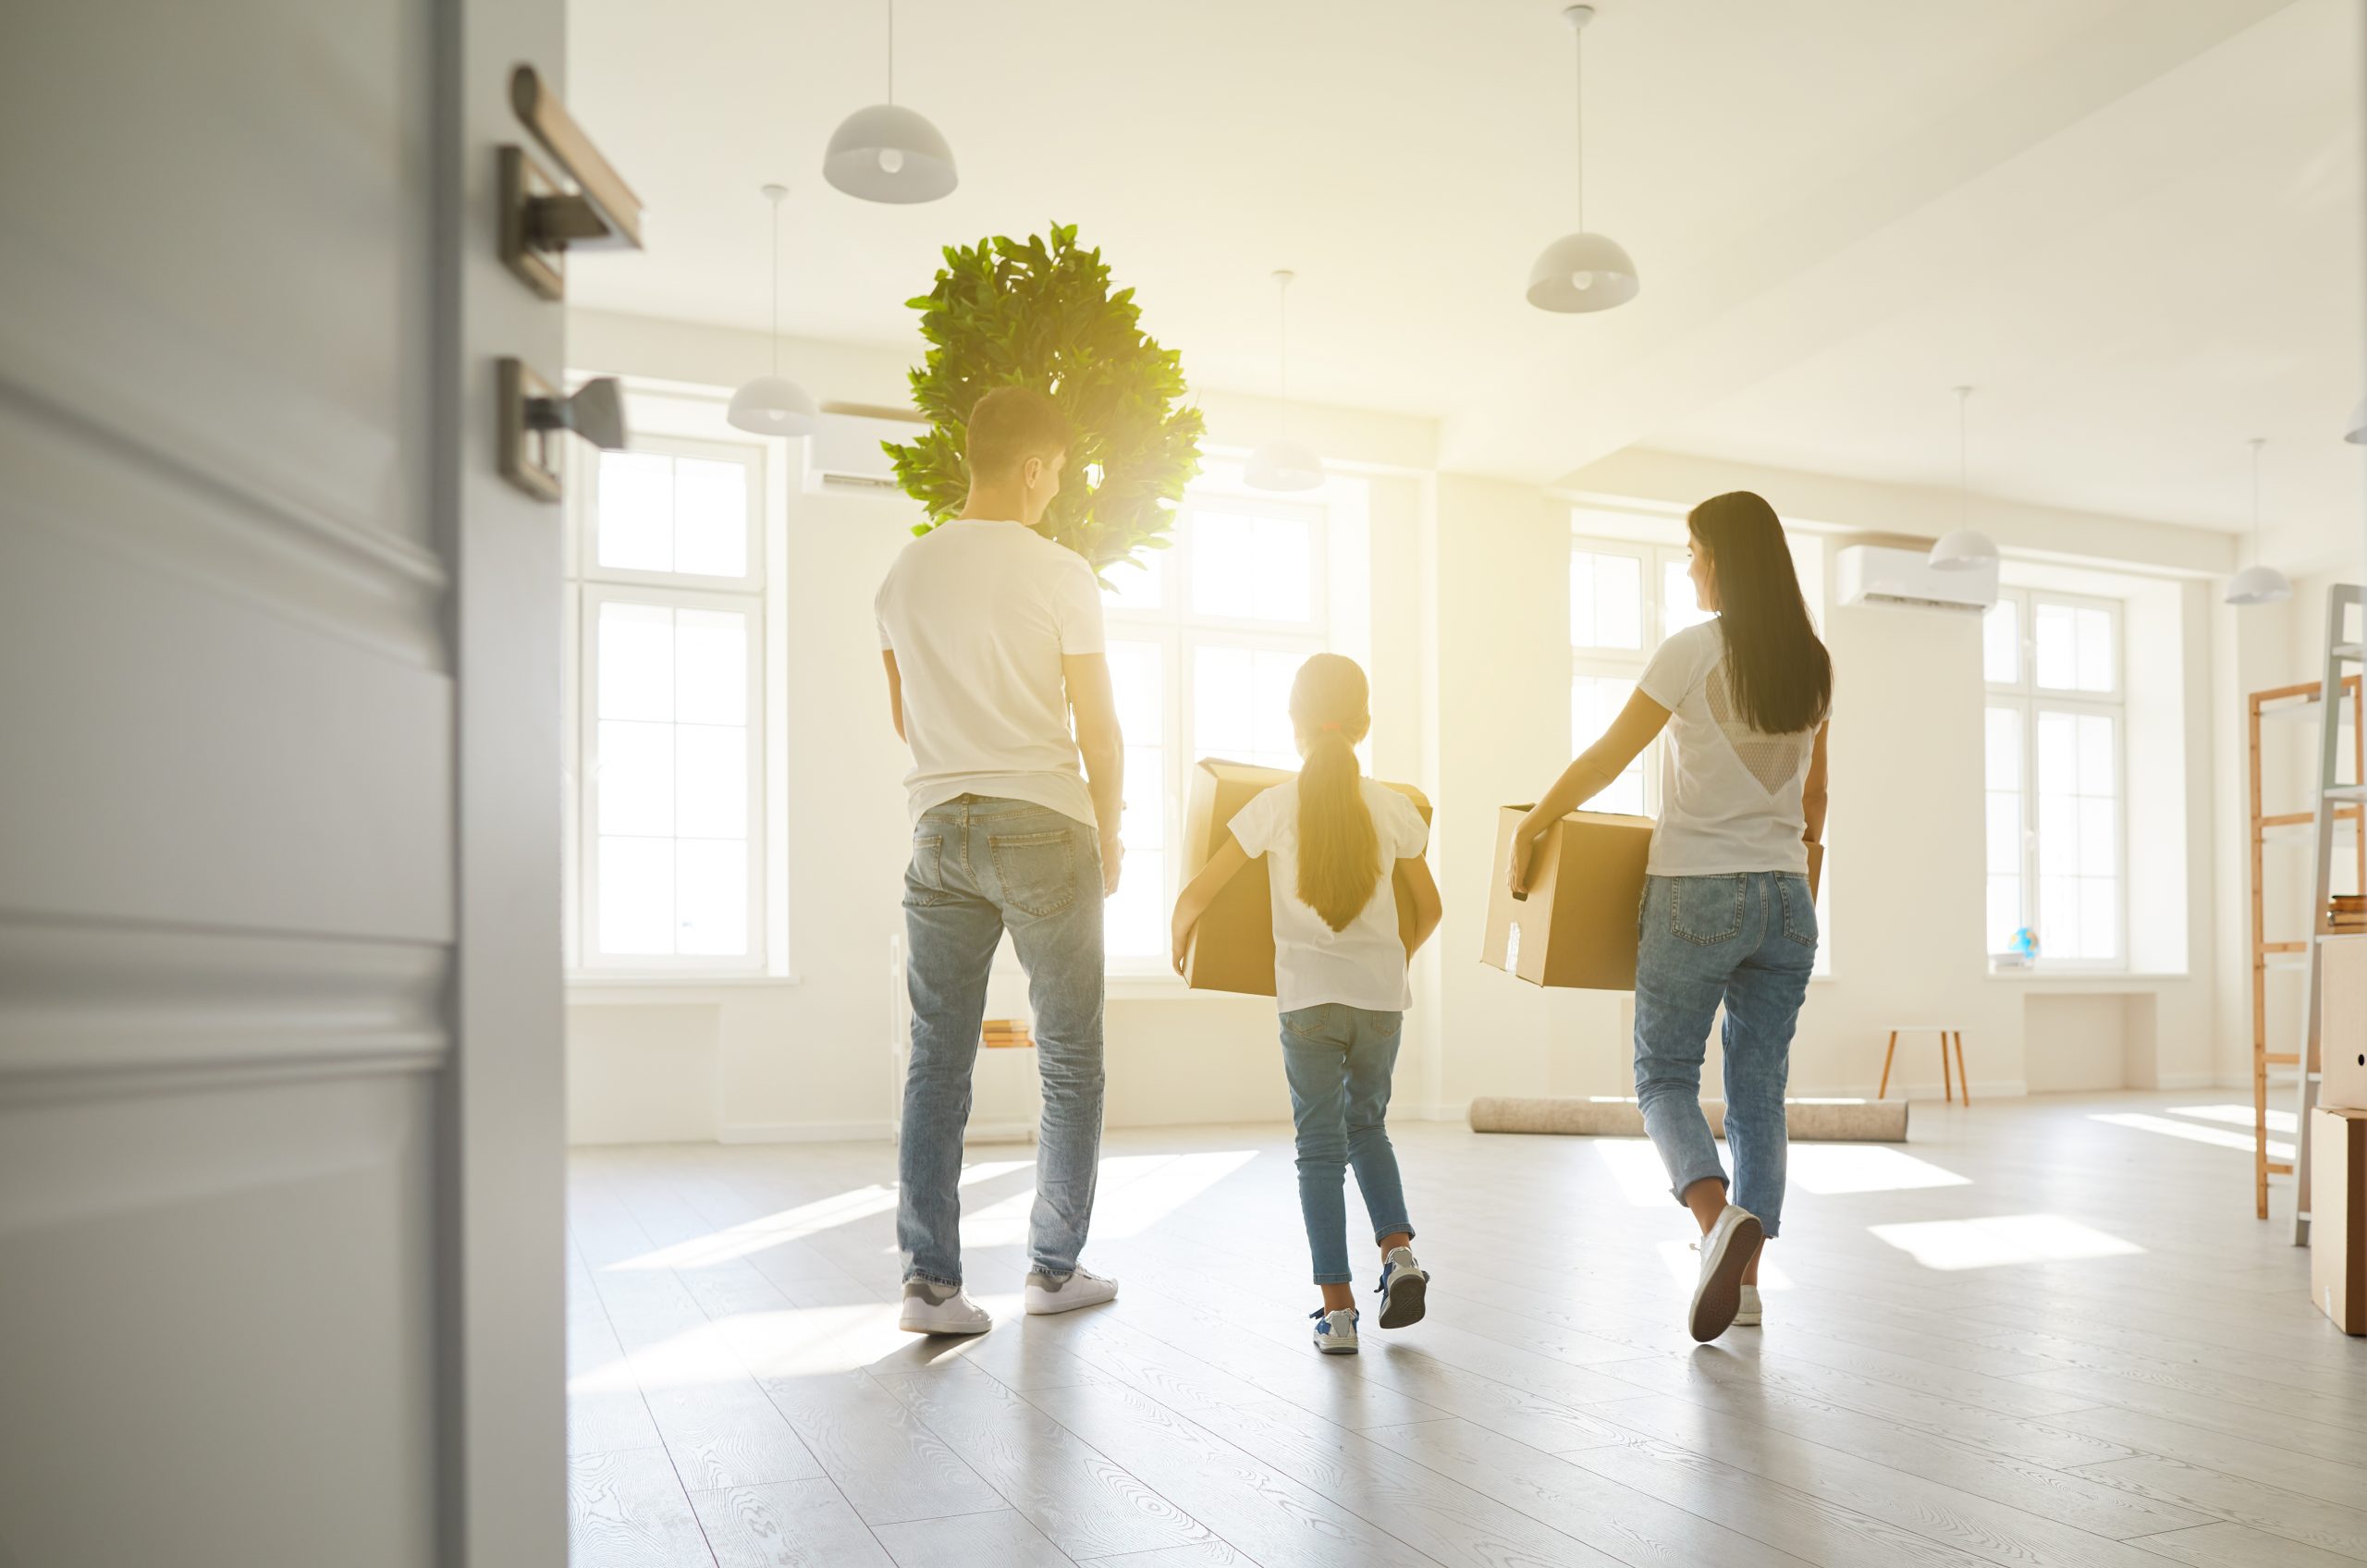 Century 21 will help your family move and find the mortgage that works for you with our partners at Centum.